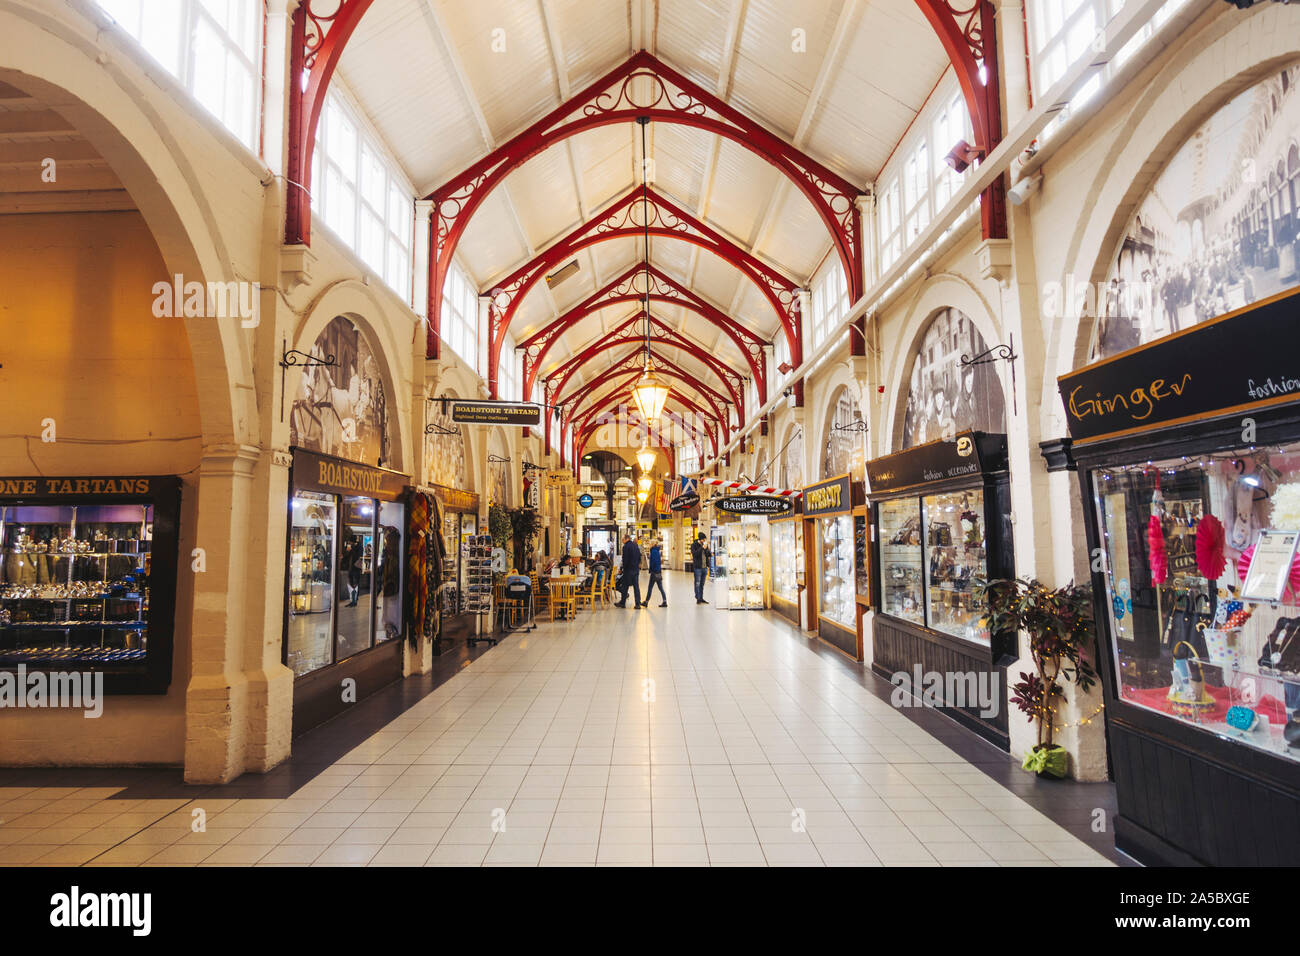 A quiet morning inside Inverness' Victorian Market. Retailers and shoppers have dwindled, proposals for reinvigoration have been made to the council. Stock Photo